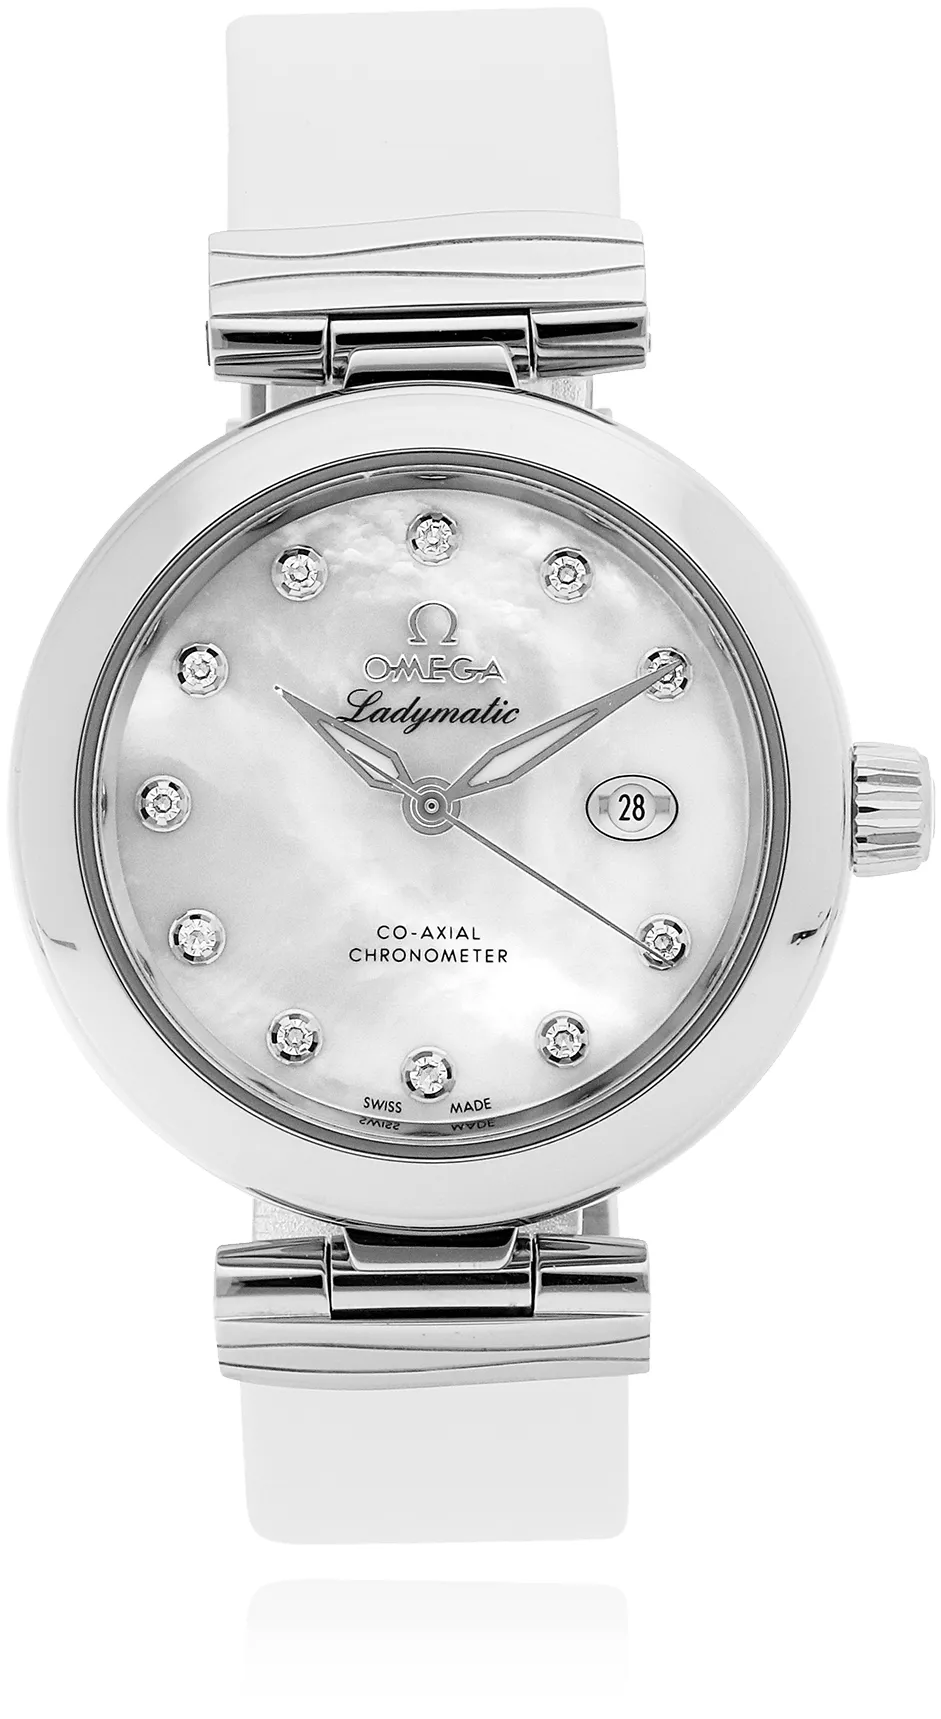 Omega De Ville Ladymatic 425.32.34.20.55.002 34mm Stainless steel •